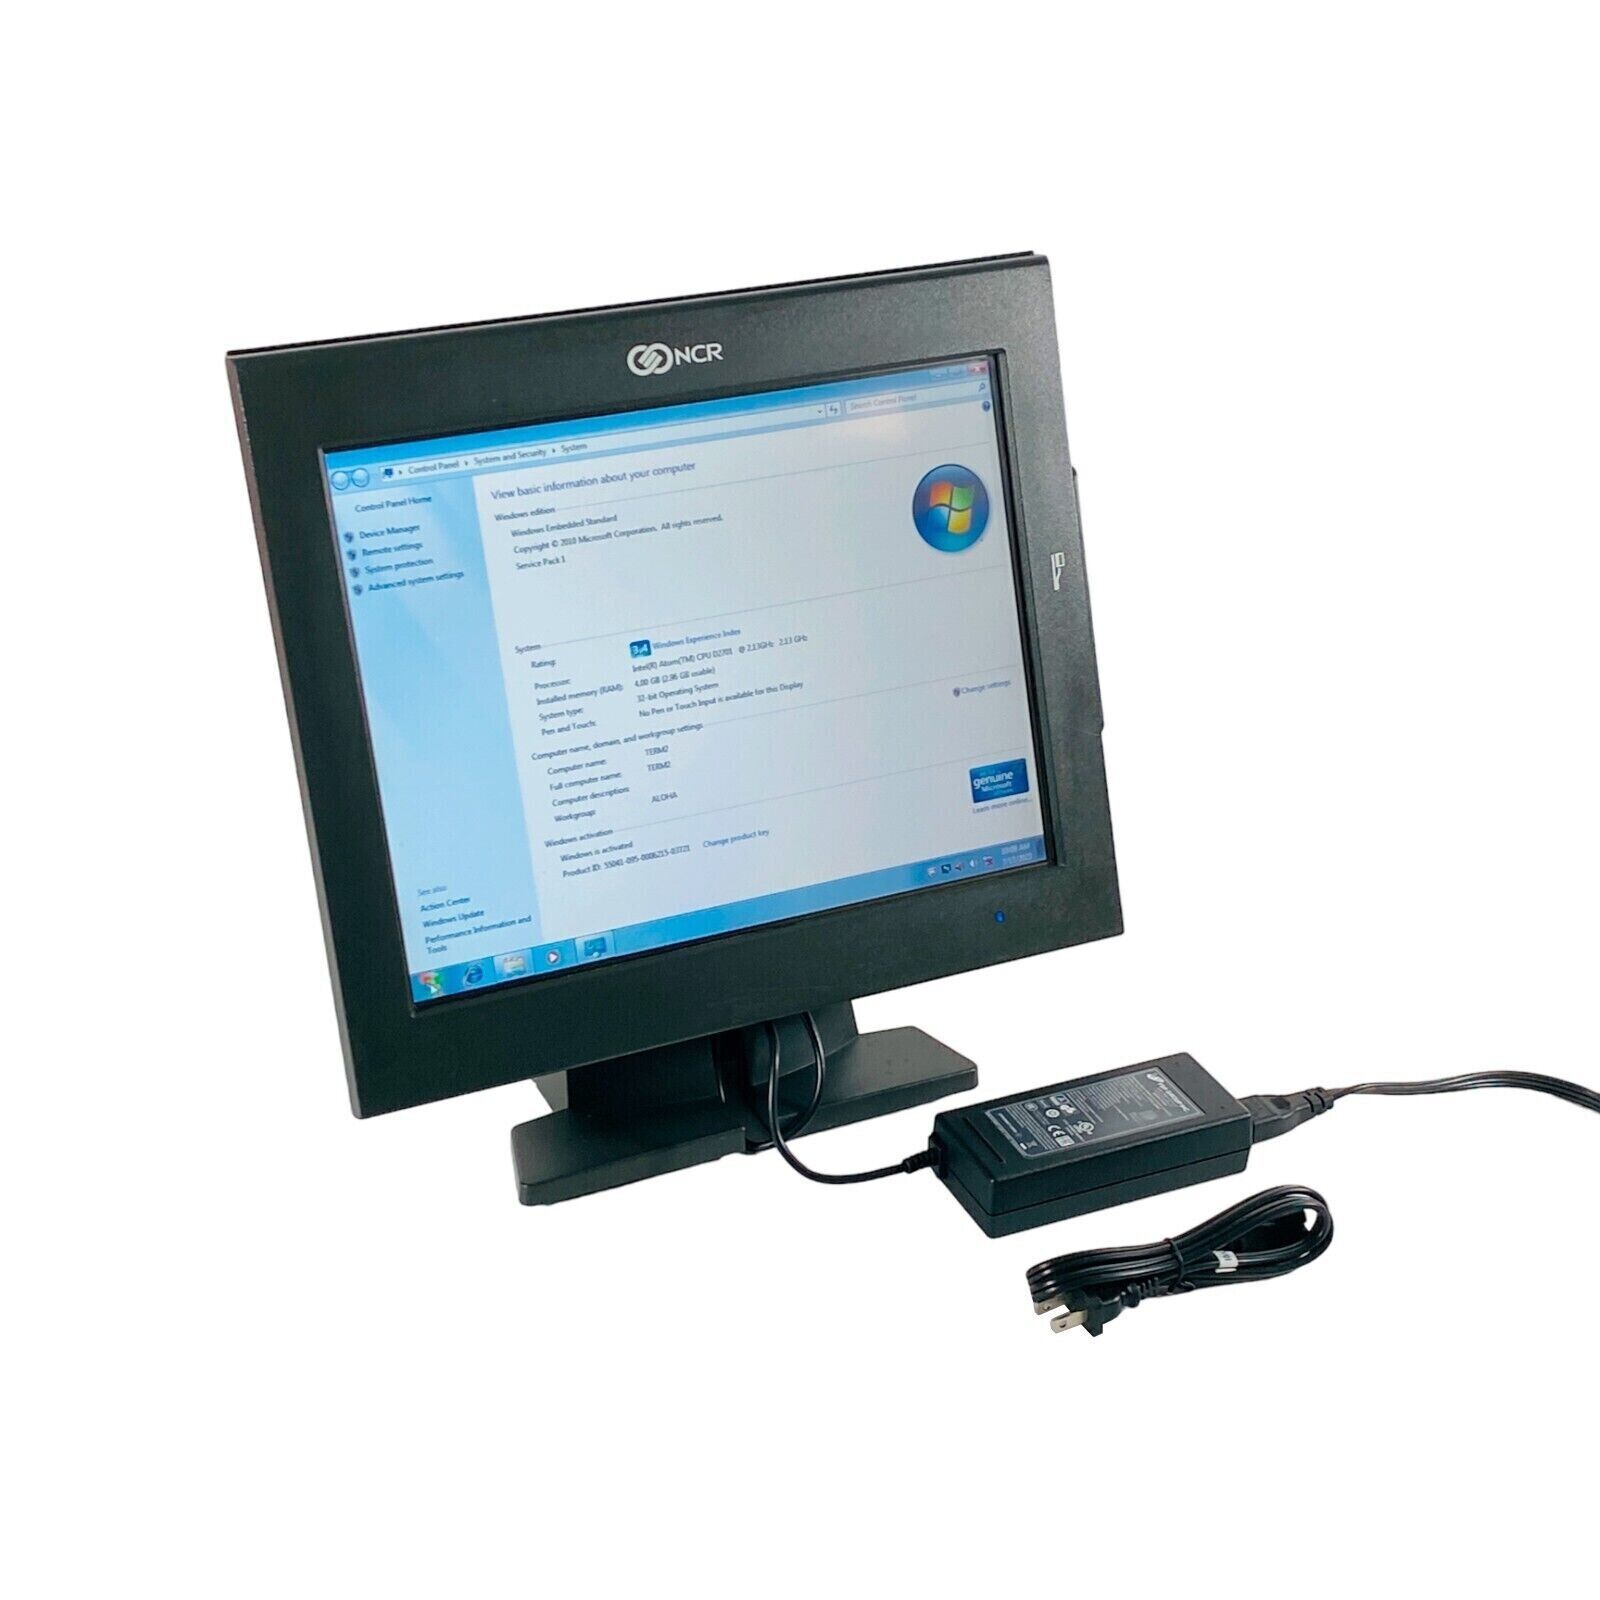 NCR 7754 Touchscreen POS Terminal Windows 7 Embed w/AC Adapter 6-Months Warranty